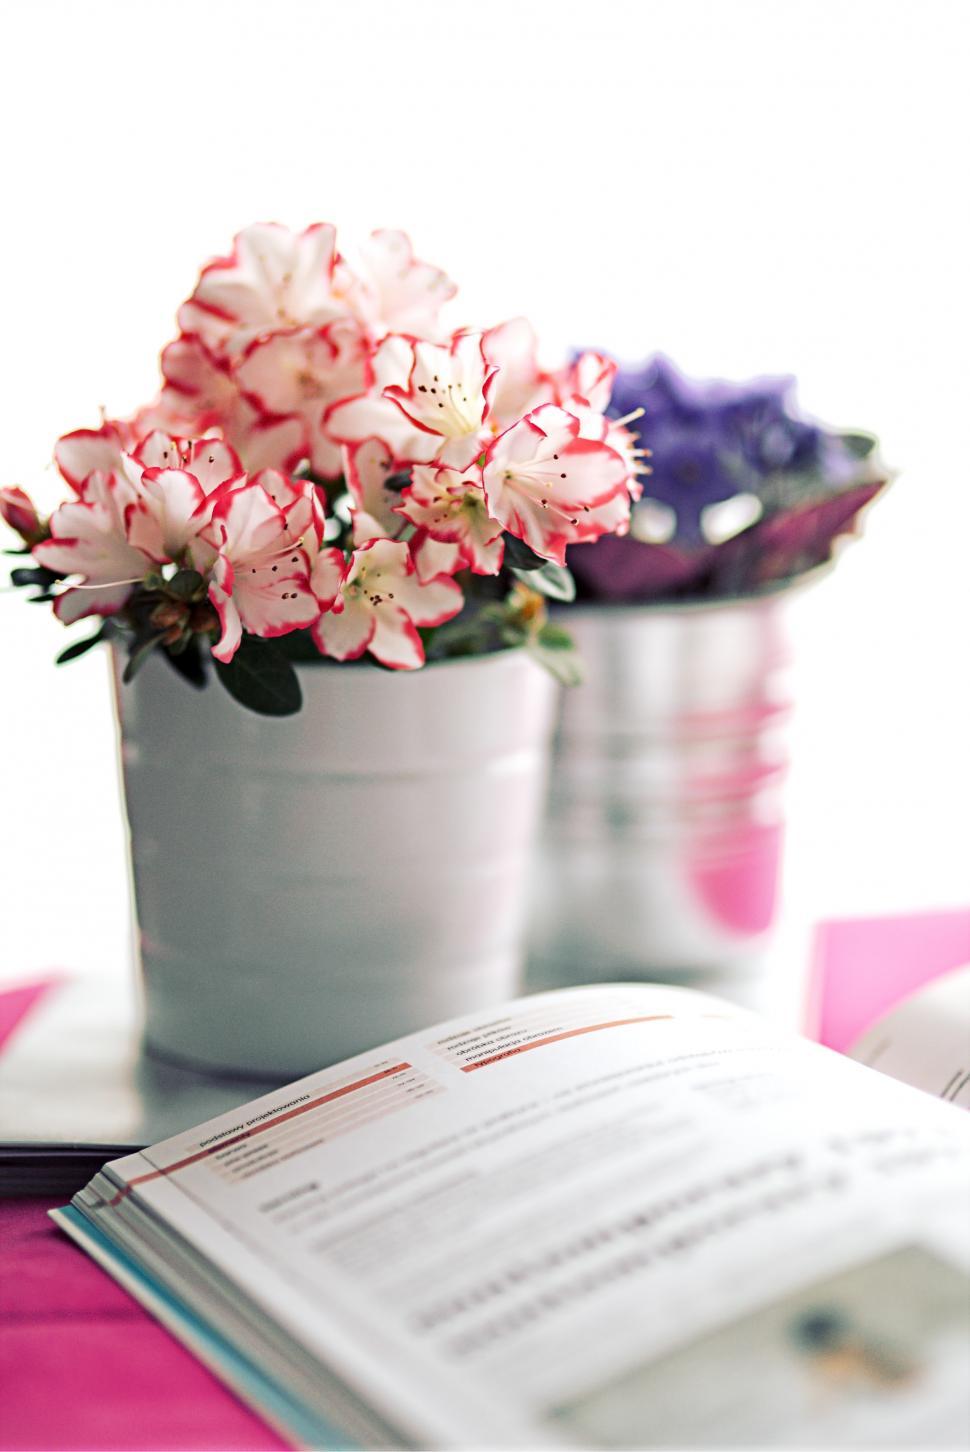 Free Image of Book and Flower Pot on Table 